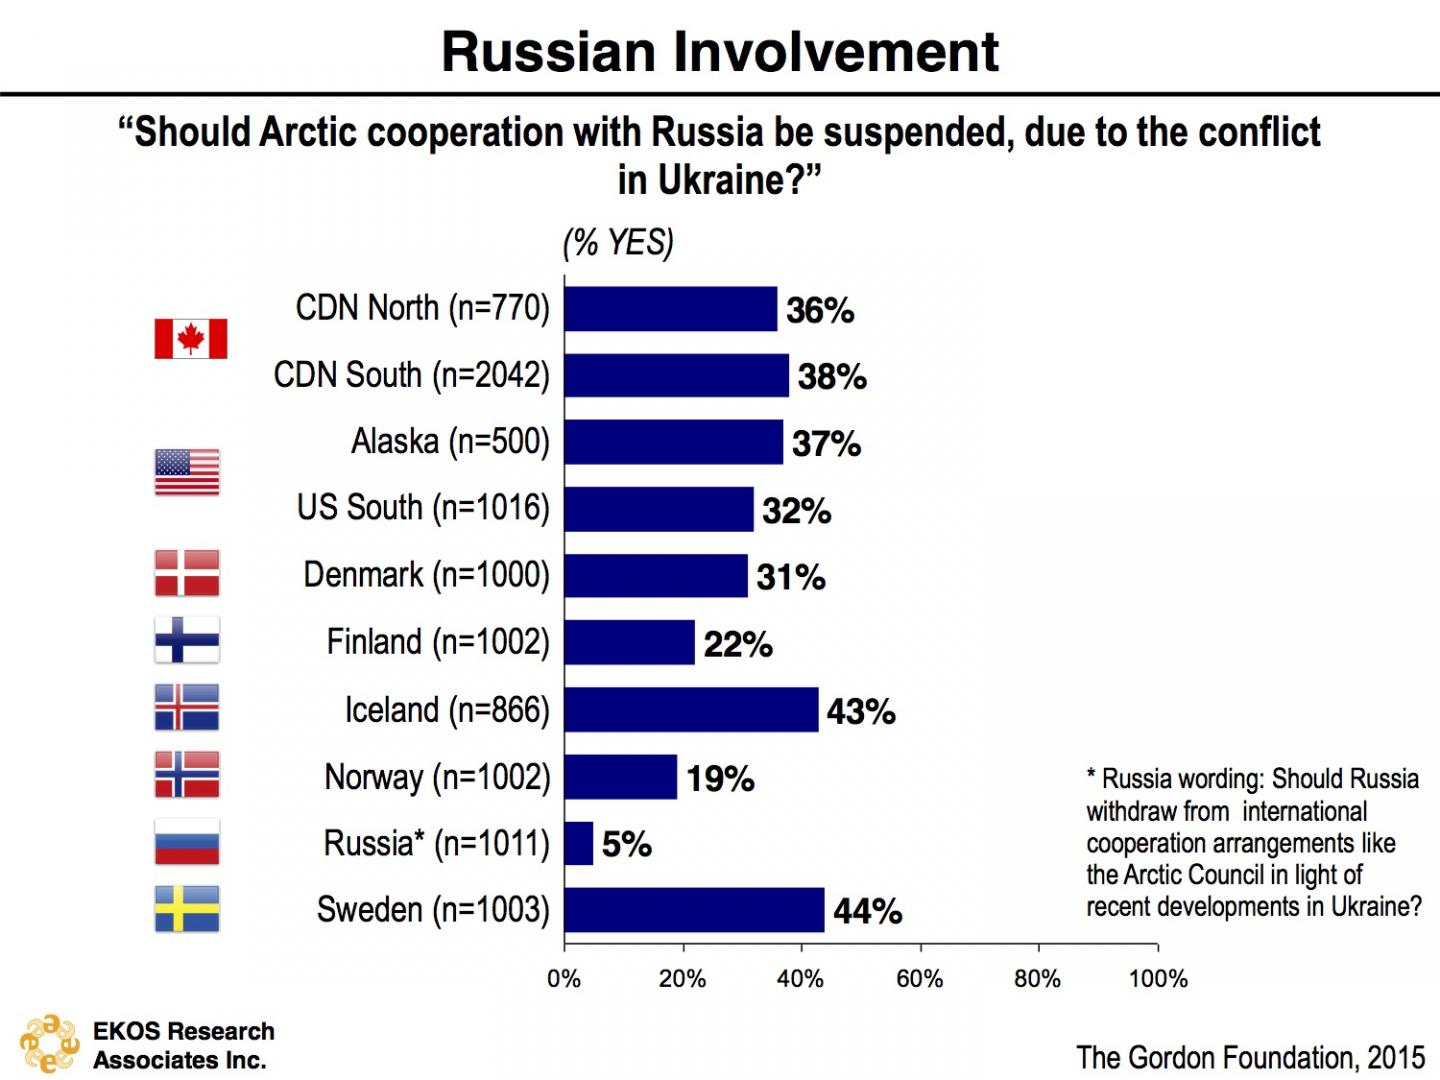 Strong Support for Cooperation with Russia in the Arctic Despite Ukraine